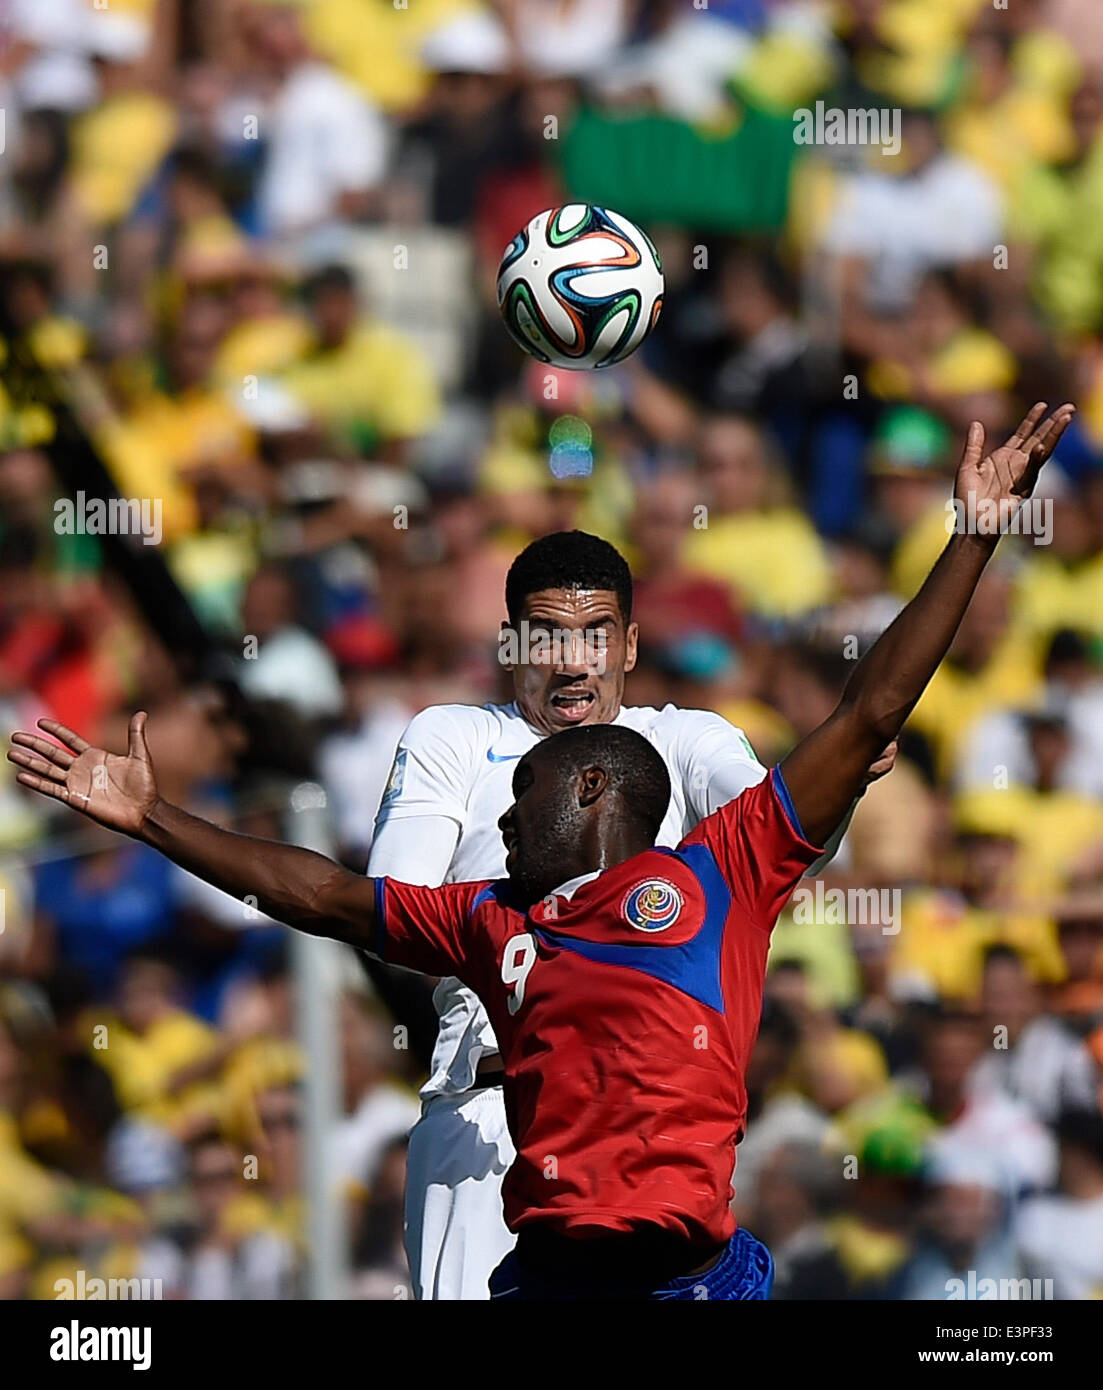 Belo Horizonte, Brazil. 24th June, 2014. Costa Rica's Joel Campbell (front) competes for a header with England's Chris Smalling during a Group D match between Costa Rica and England of 2014 FIFA World Cup at the Estadio Mineirao Stadium in Belo Horizonte, Brazil, on June 24, 2014. England drew 0-0 with Costa Rica on Tuesday. © Qi Heng/Xinhua/Alamy Live News Stock Photo